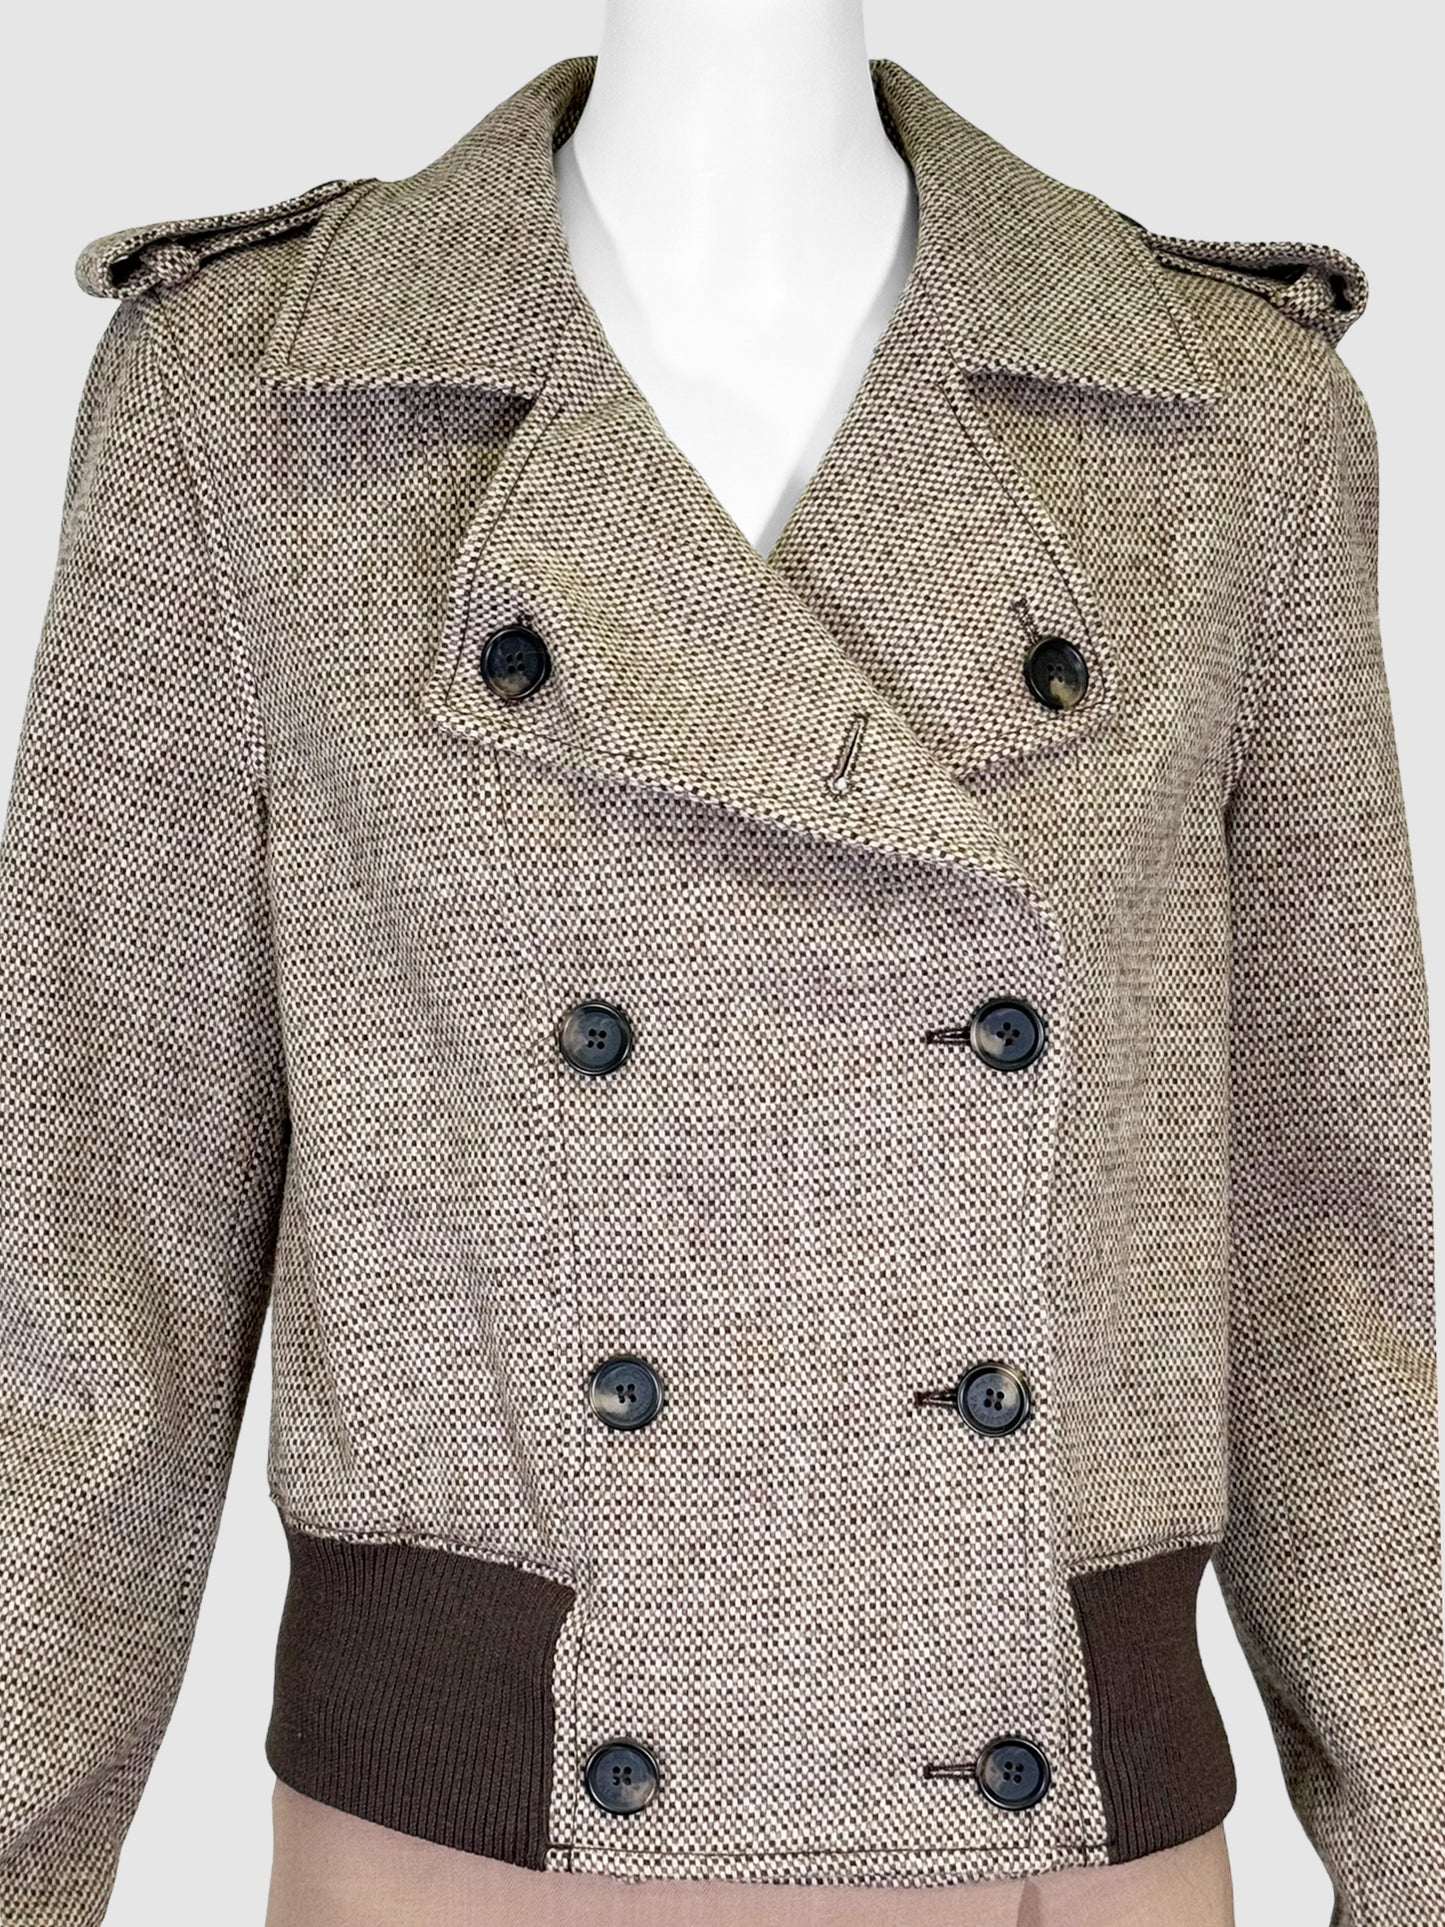 RED Valentino Tweed Double-Breasted Jacket - Size 42